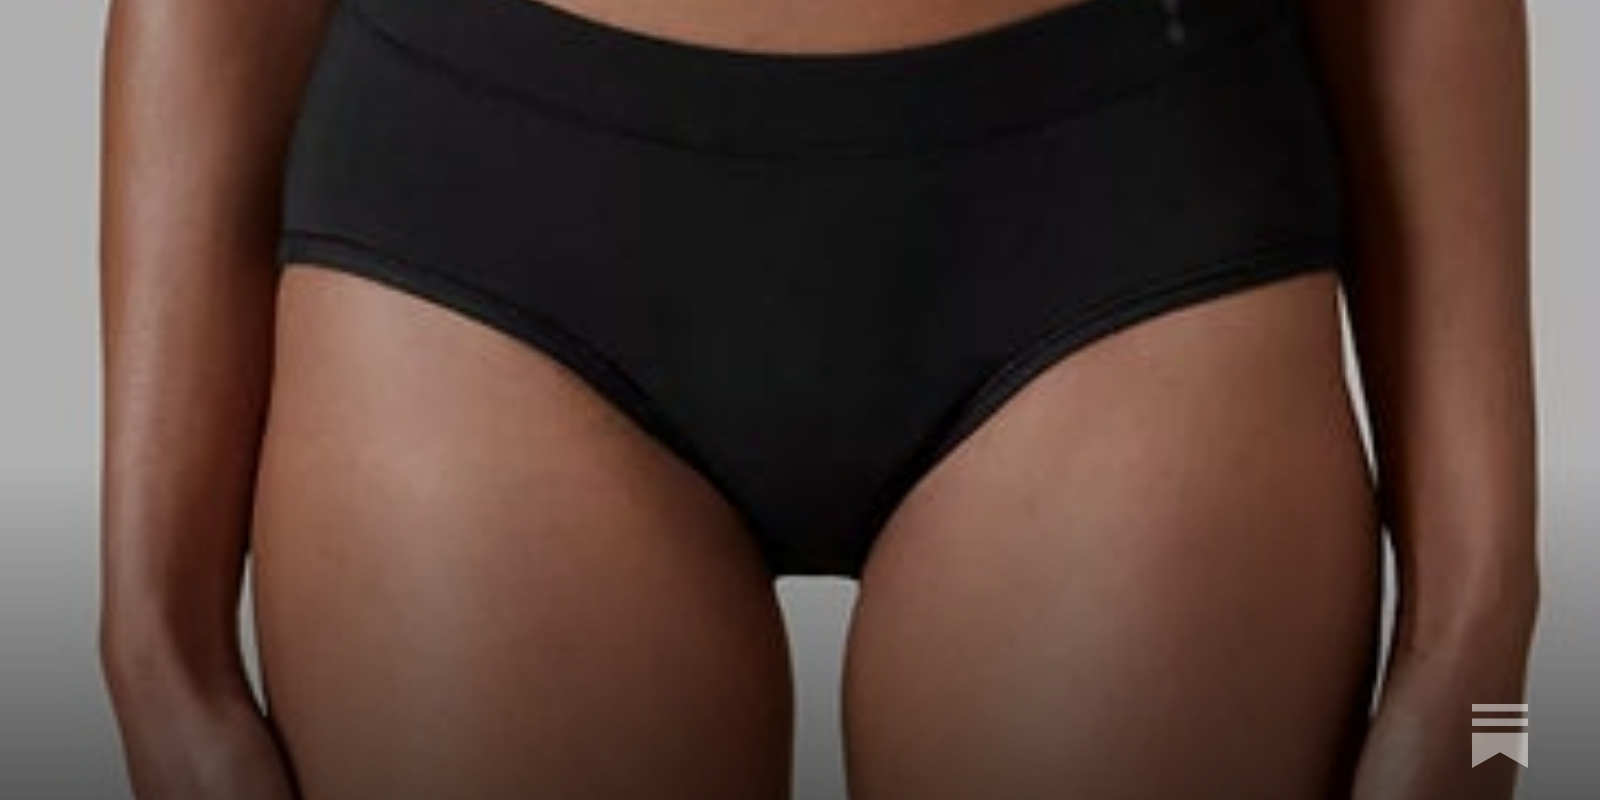 Thinx period underwear was supposed to be 'non-toxic'. Now customers feel  betrayed. : r/TwoXChromosomes